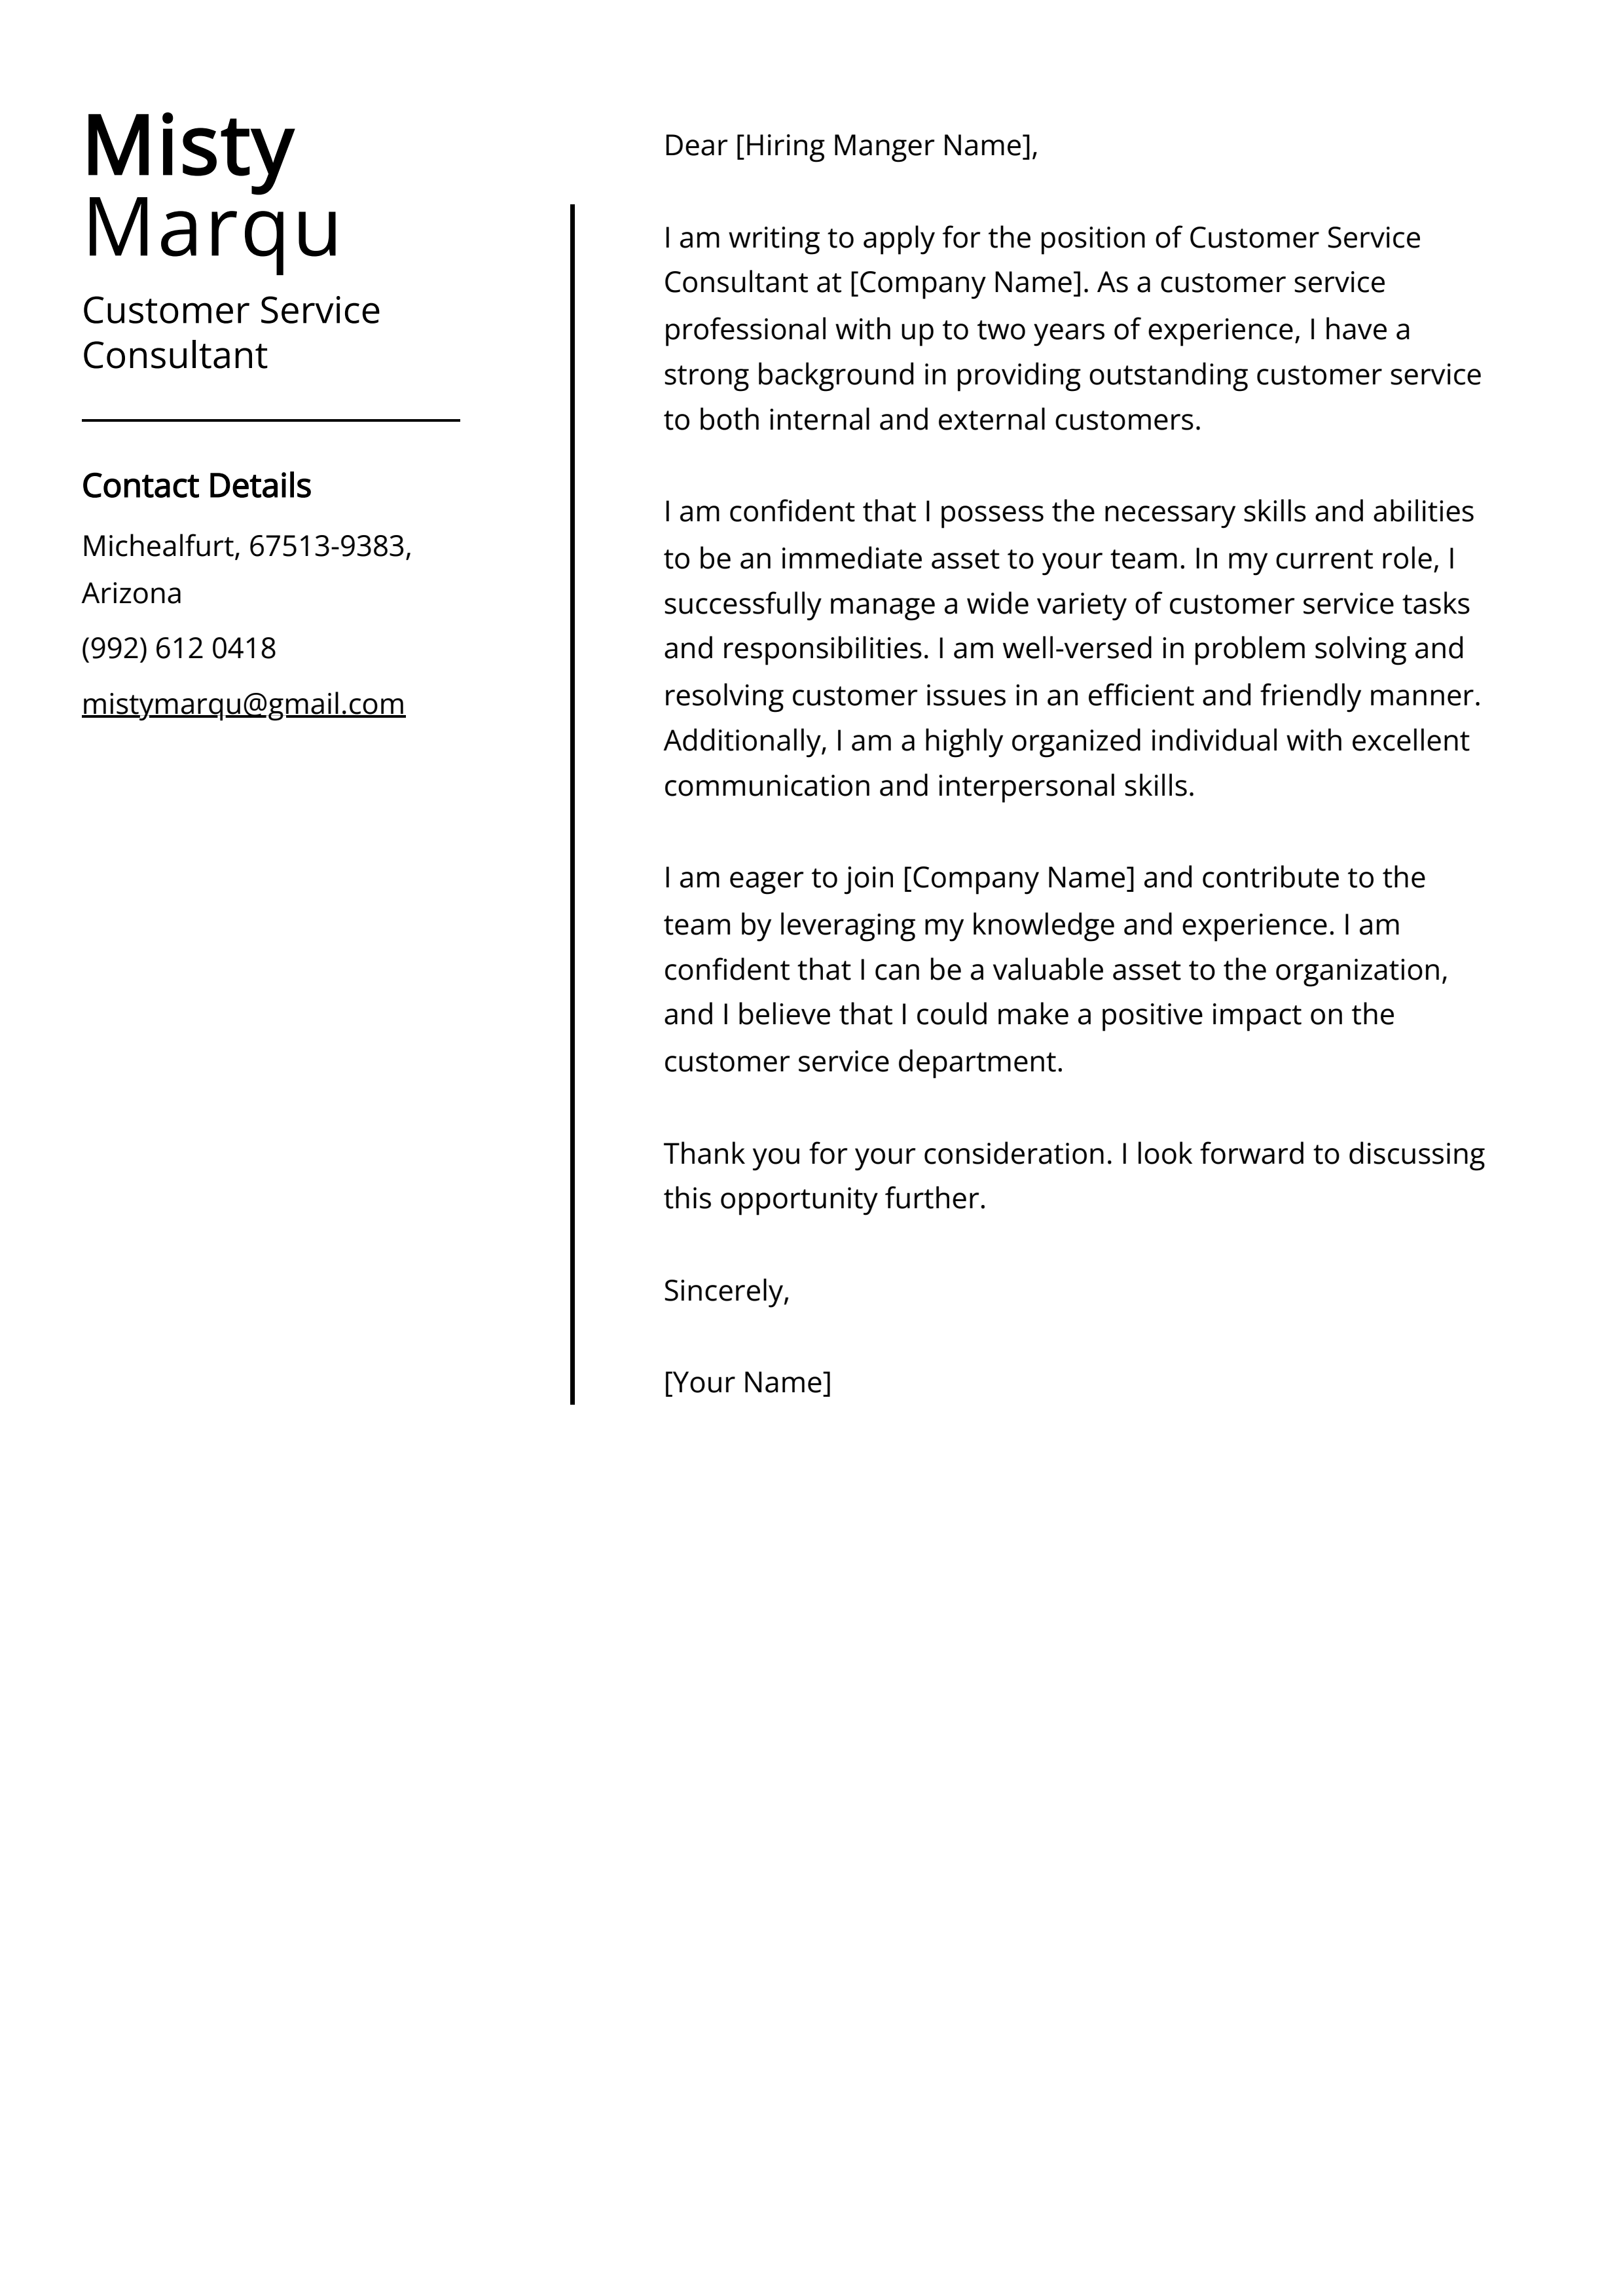 Customer Service Consultant Cover Letter Example